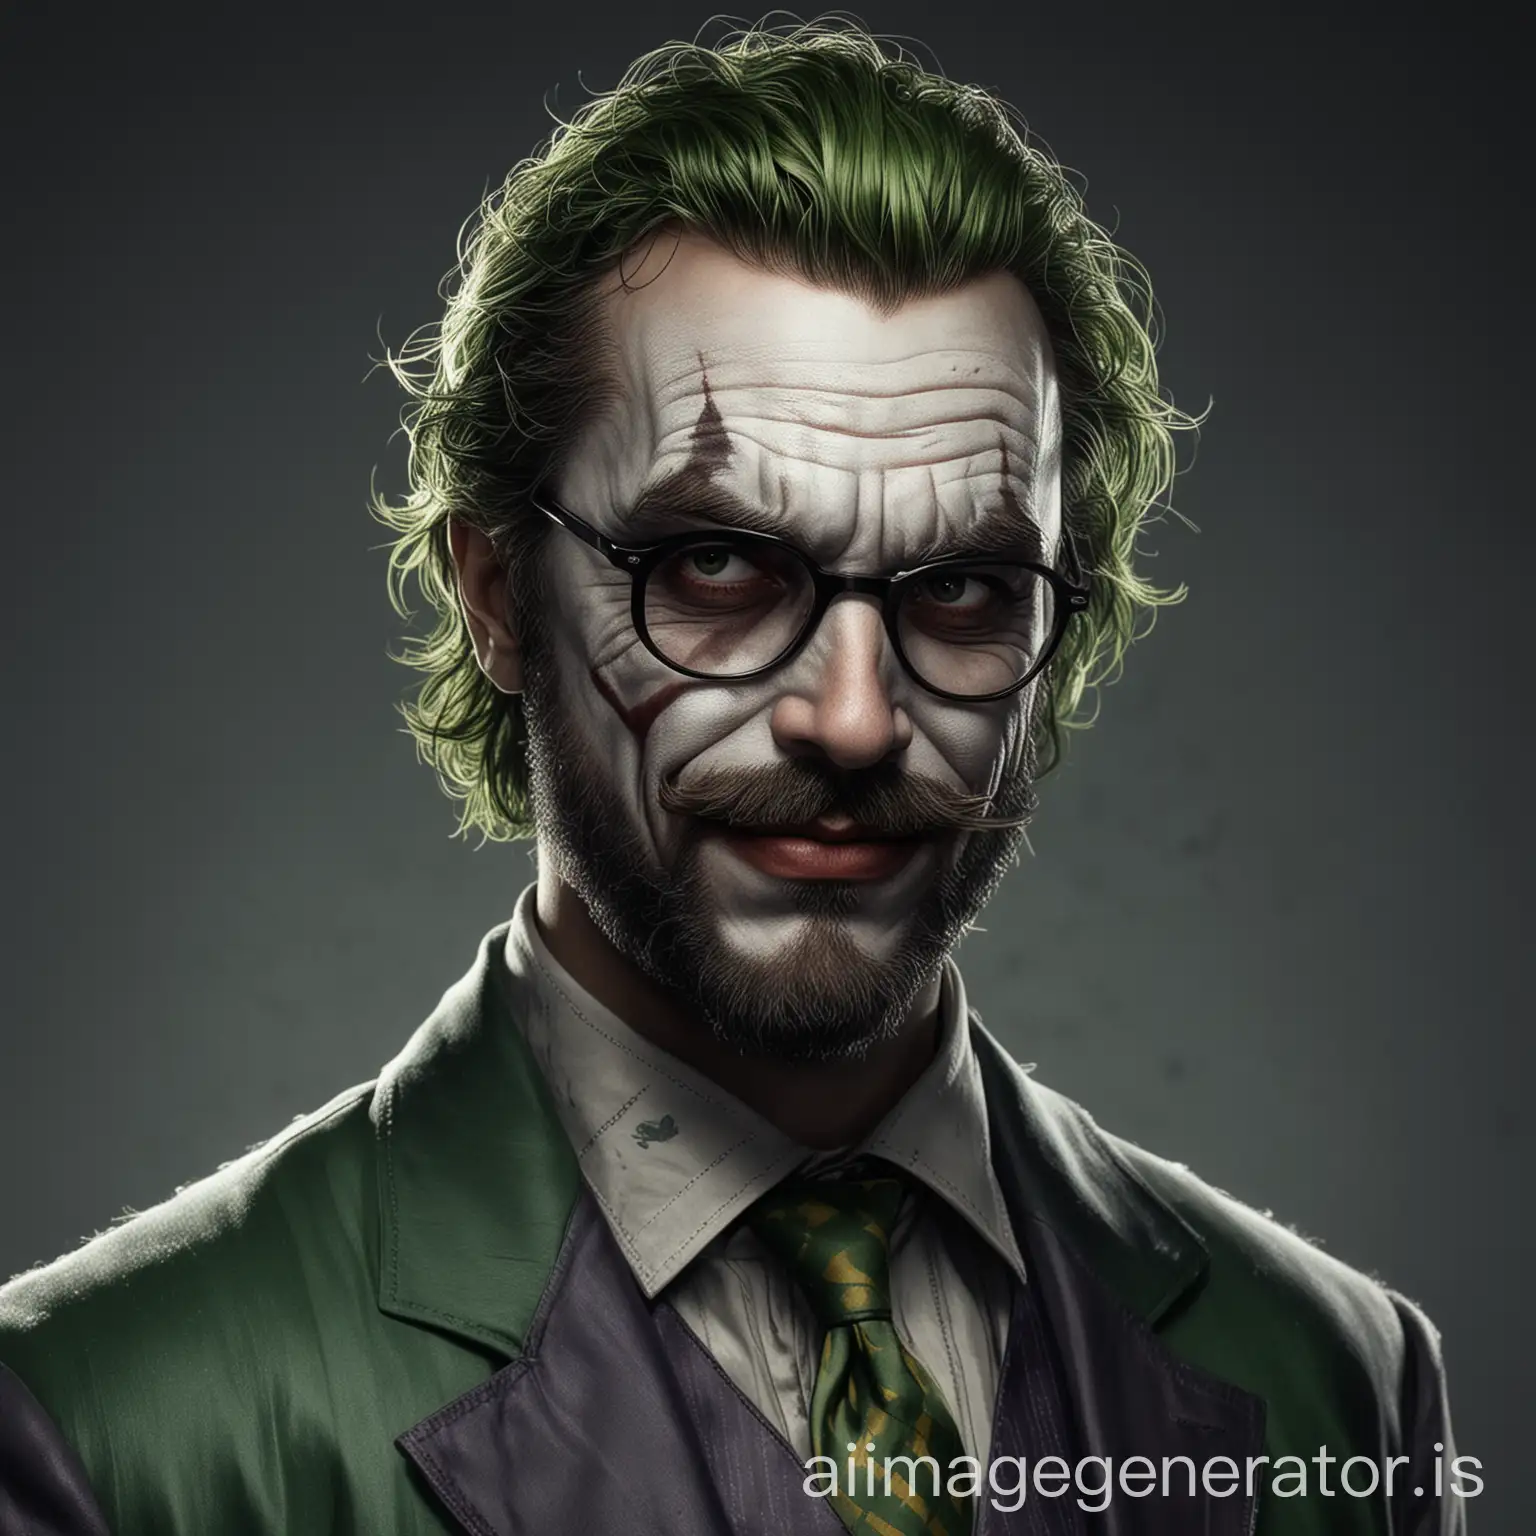 Gangster-Joker-with-Full-Beard-and-Mustache-in-DC-Comics-Style